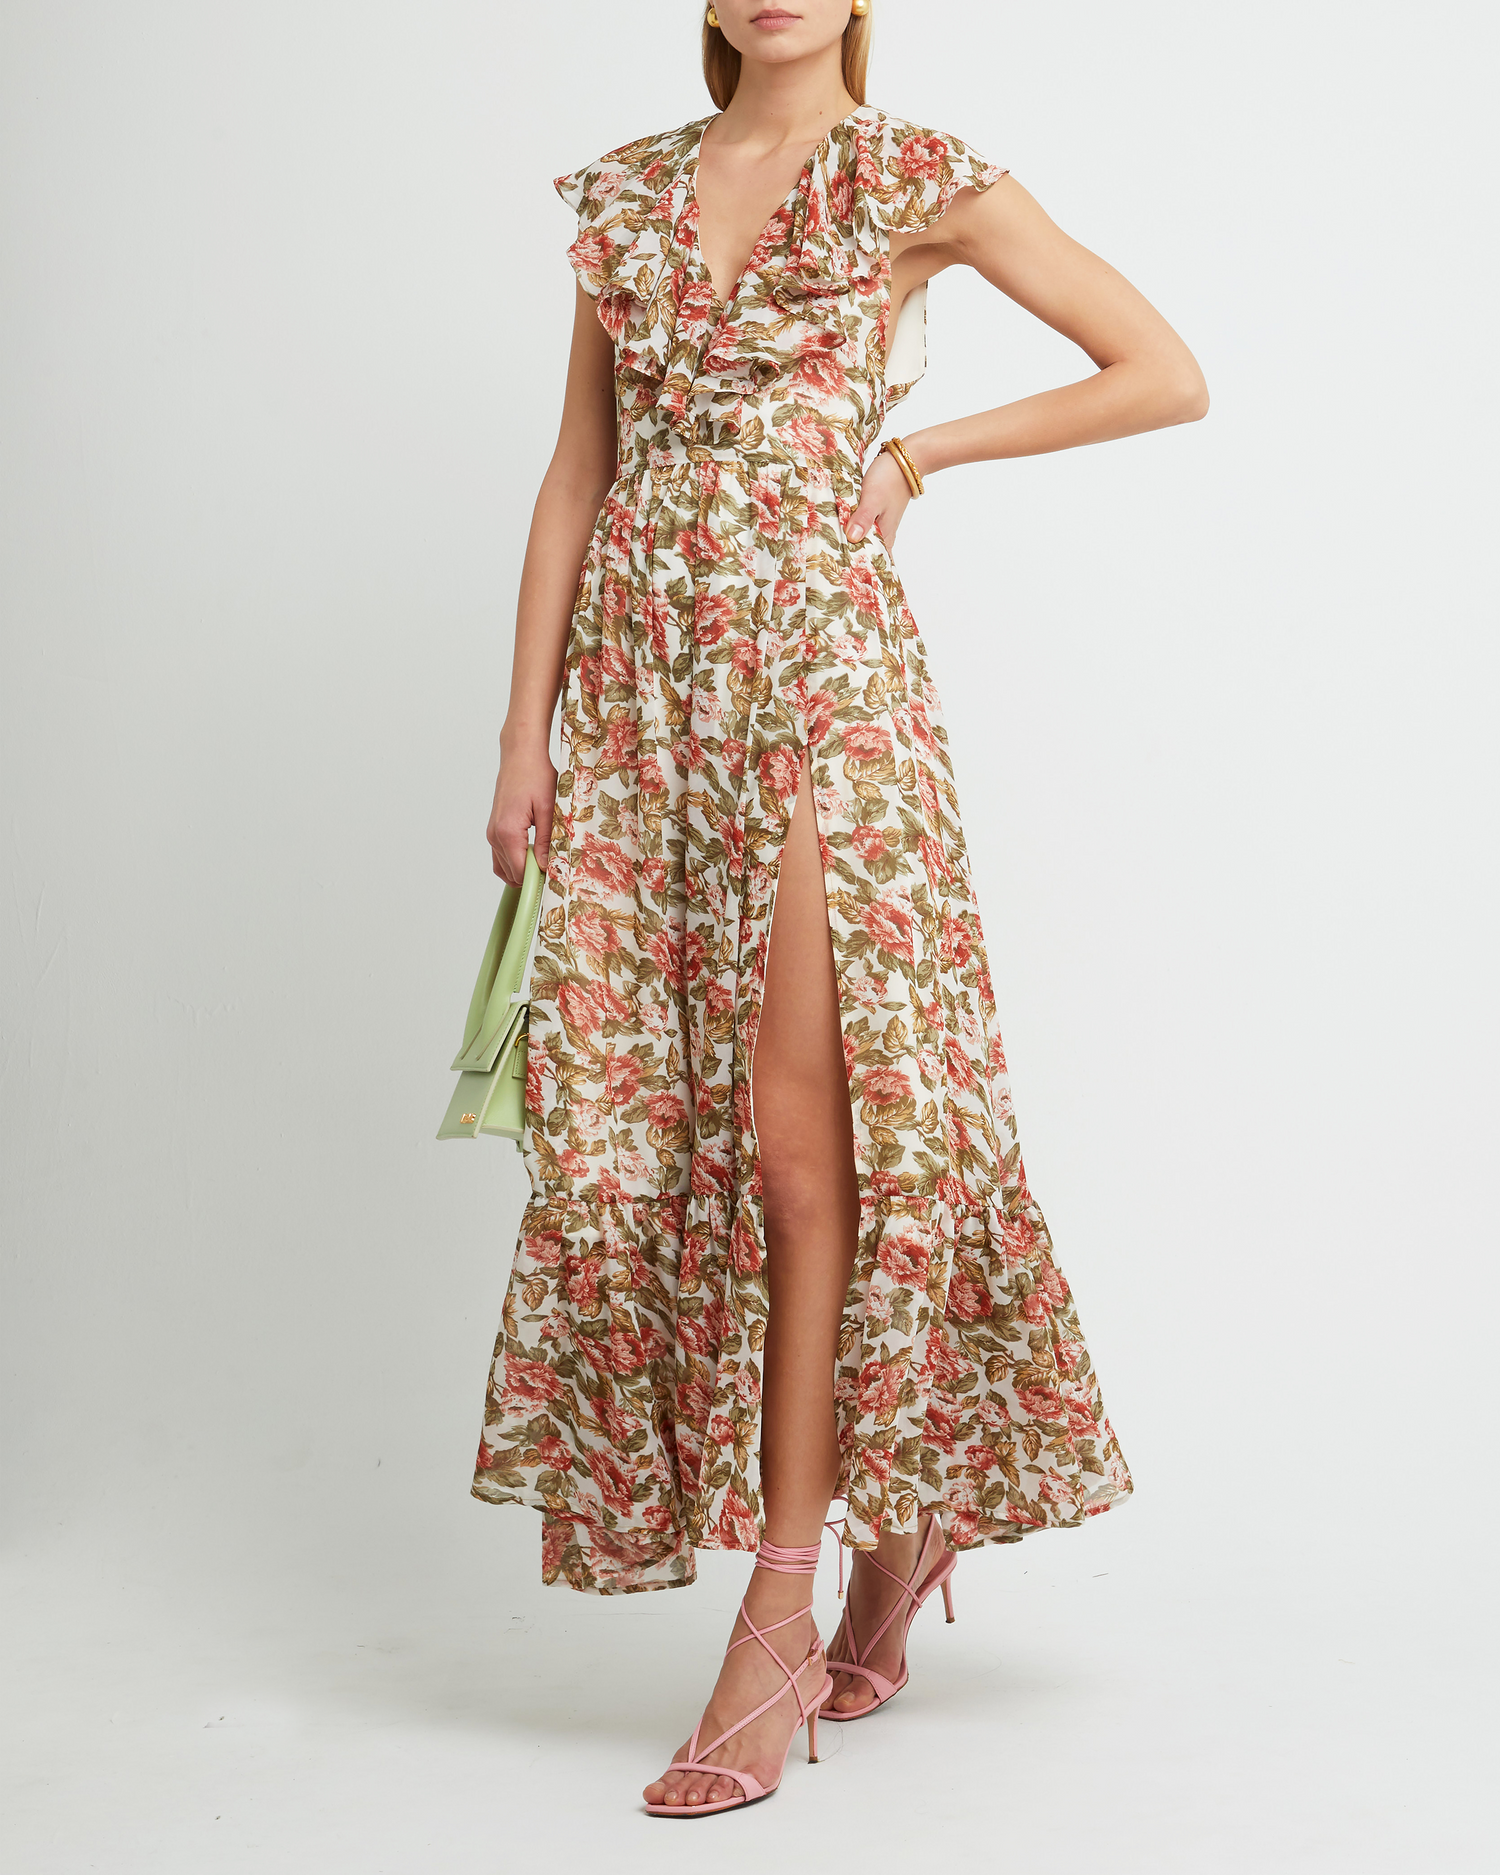 First image of Shea Maxi Dress, a floral wedding guest dress with high side slit, flutter ruffle sleeves, v-neckline, tiered skirt, cinched waistline, side zipper, and lining